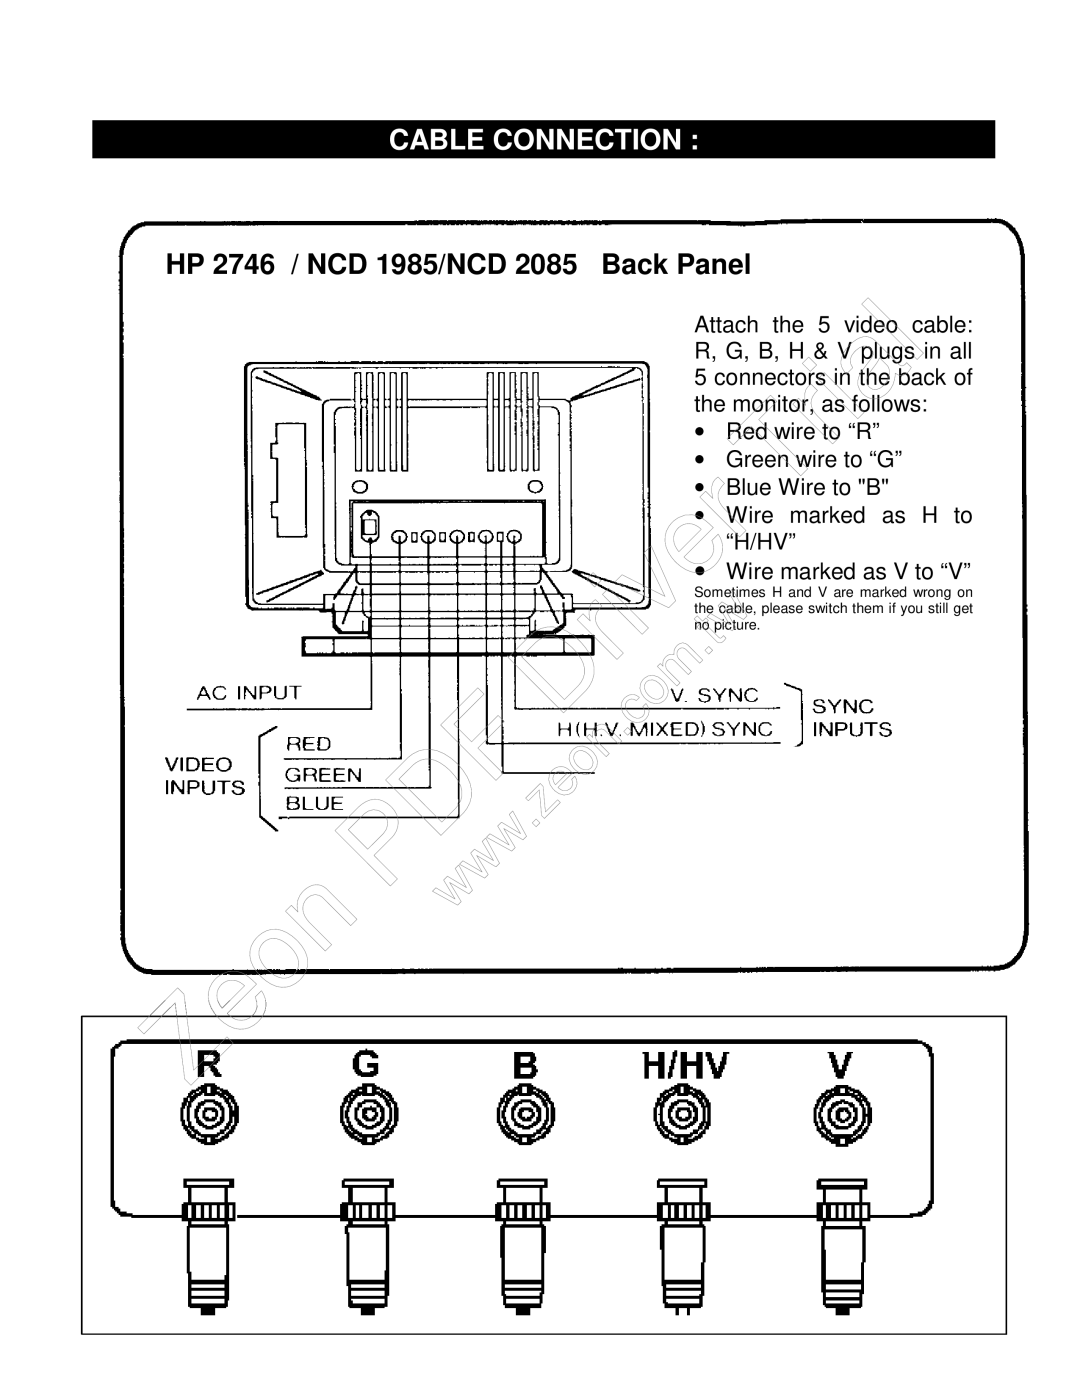 Hitachi 4420 installation manual Trial, zeon, Cable Connection, HP 2746 / NCD 1985/NCD 2085 Back Panel, Zeon, Driver 